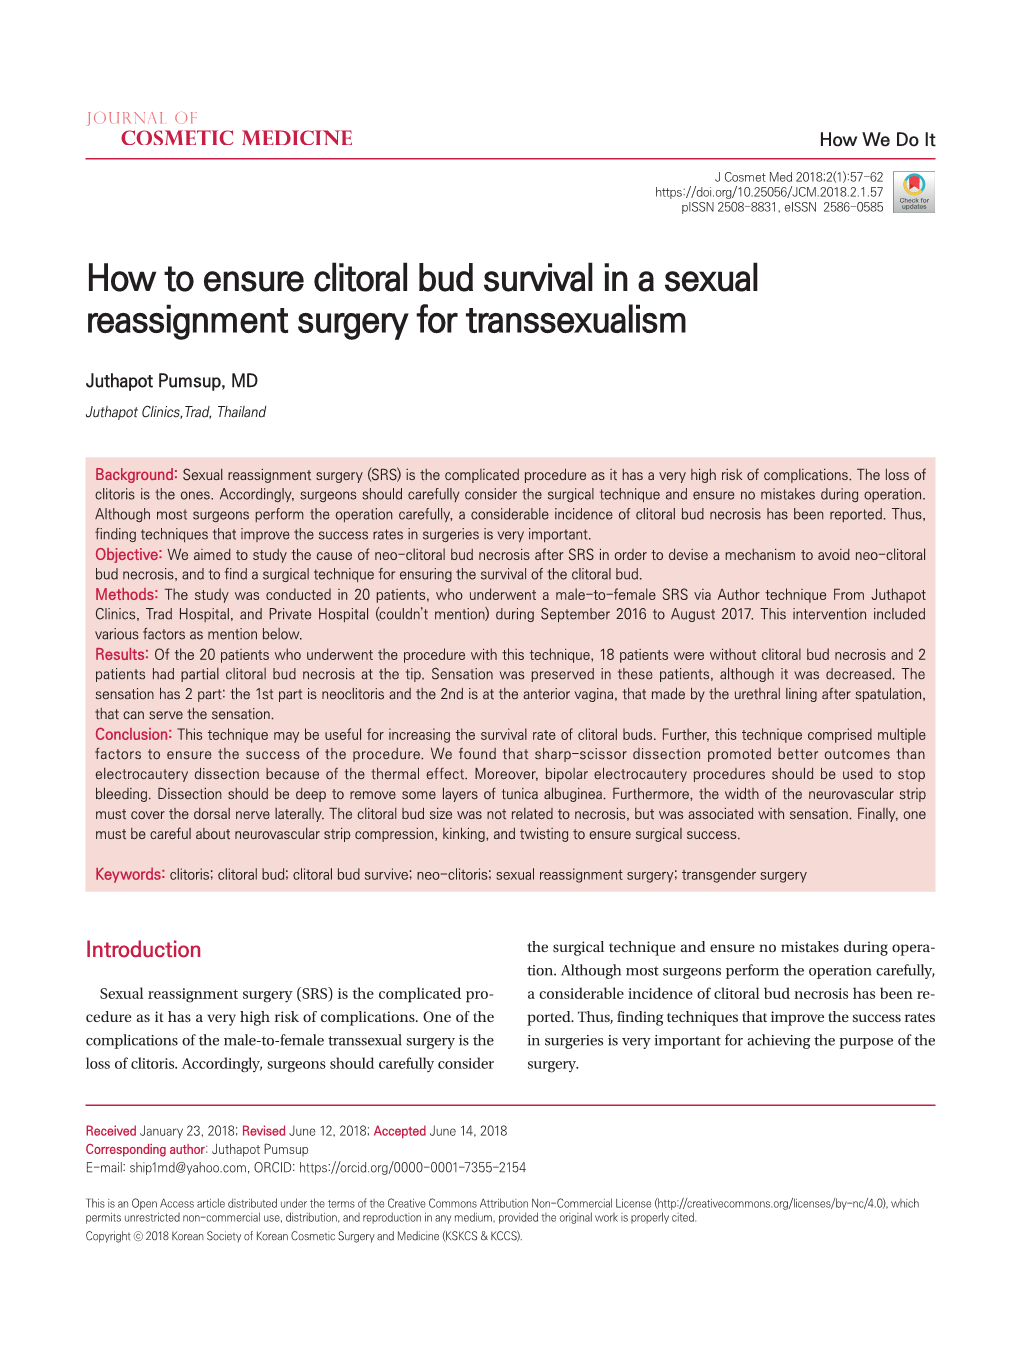 How to Ensure Clitoral Bud Survival in a Sexual Reassignment Surgery for Transsexualism